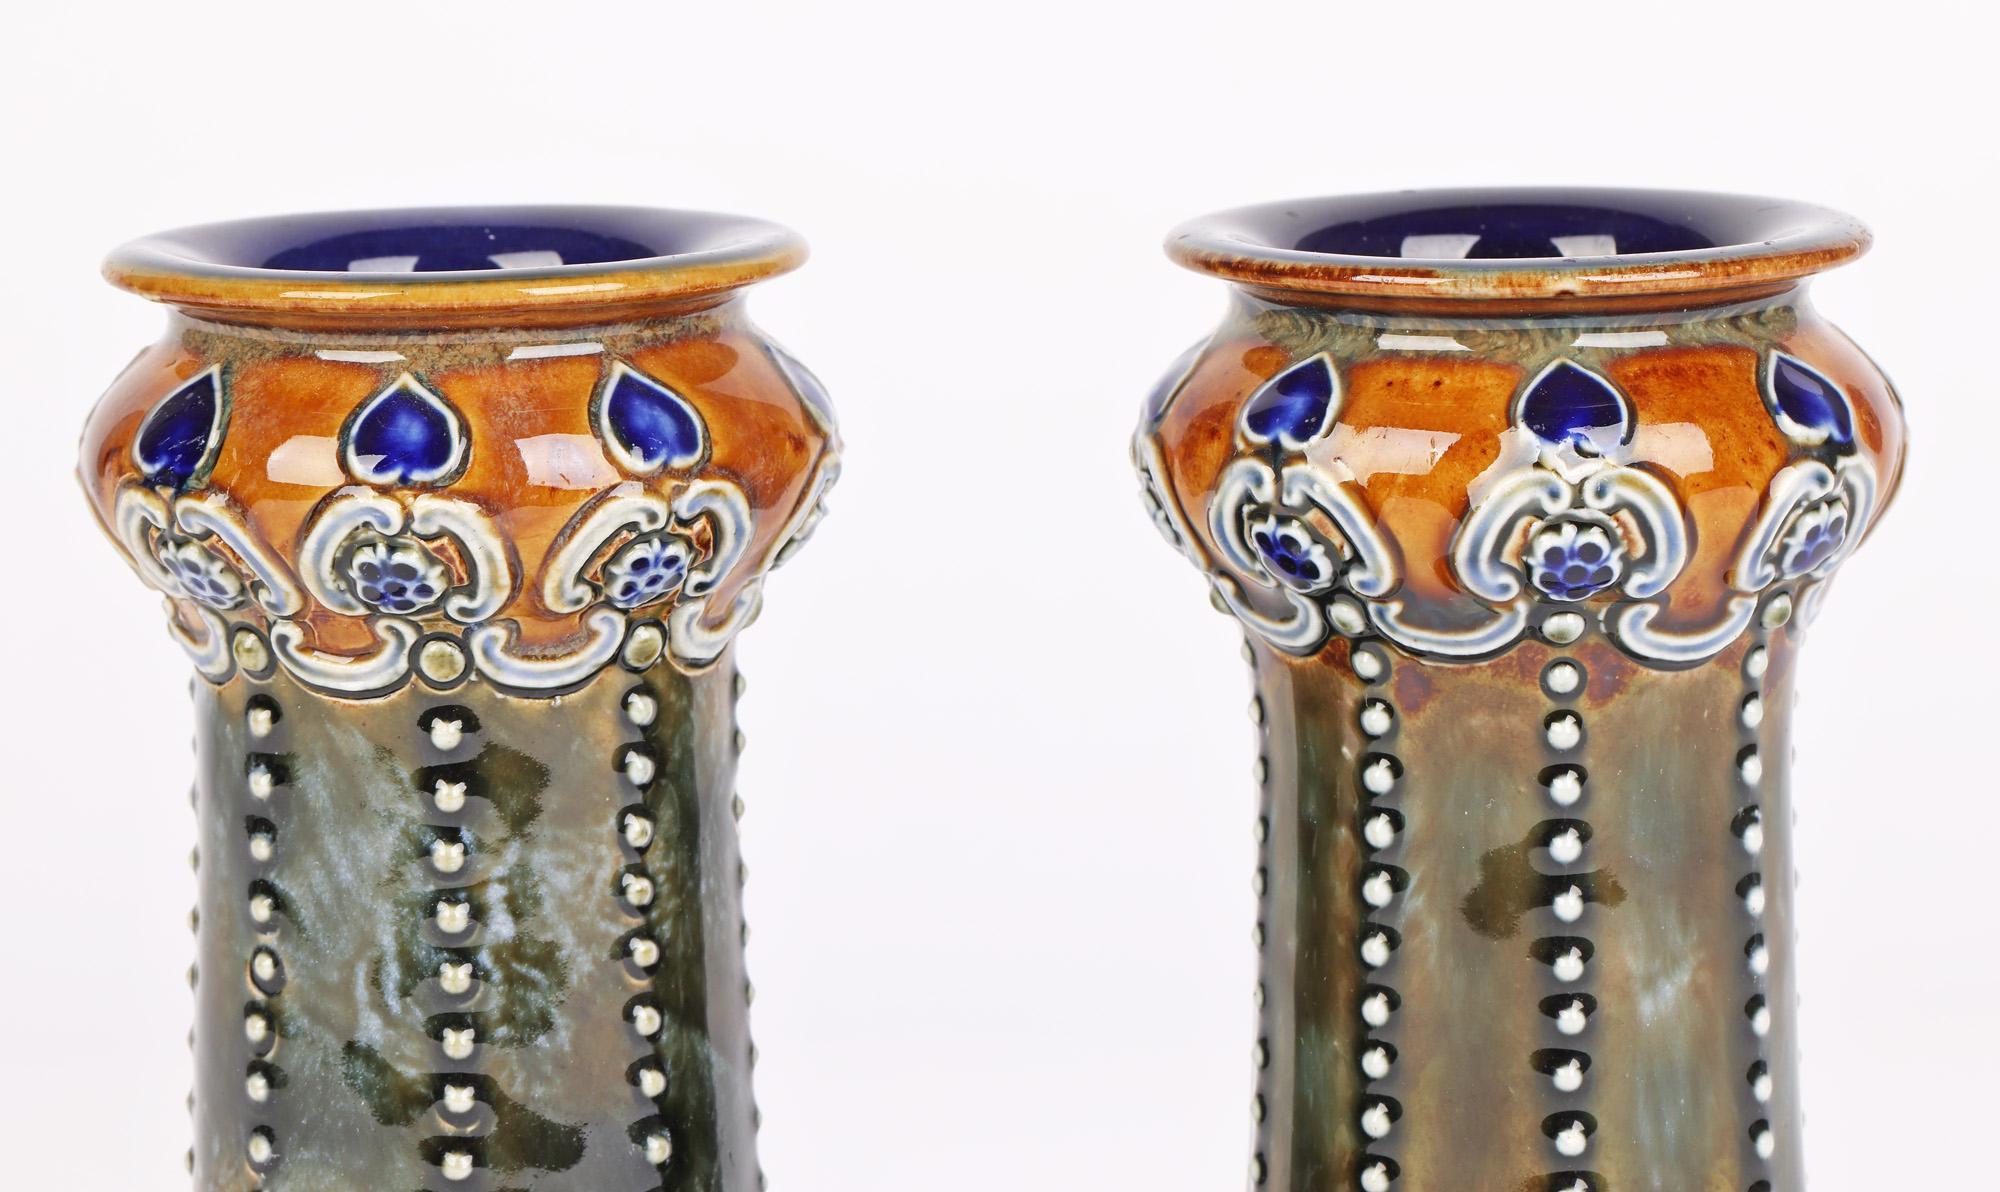 A very stylish pair Doulton Lambeth Art Nouveau bud shaped vases with stylized floral designs by Ethel Beard and Rosina Harris and dating from around 1902. The stunning pair stone ware vases stand on a wide skirt shaped foot with a funnel shaped